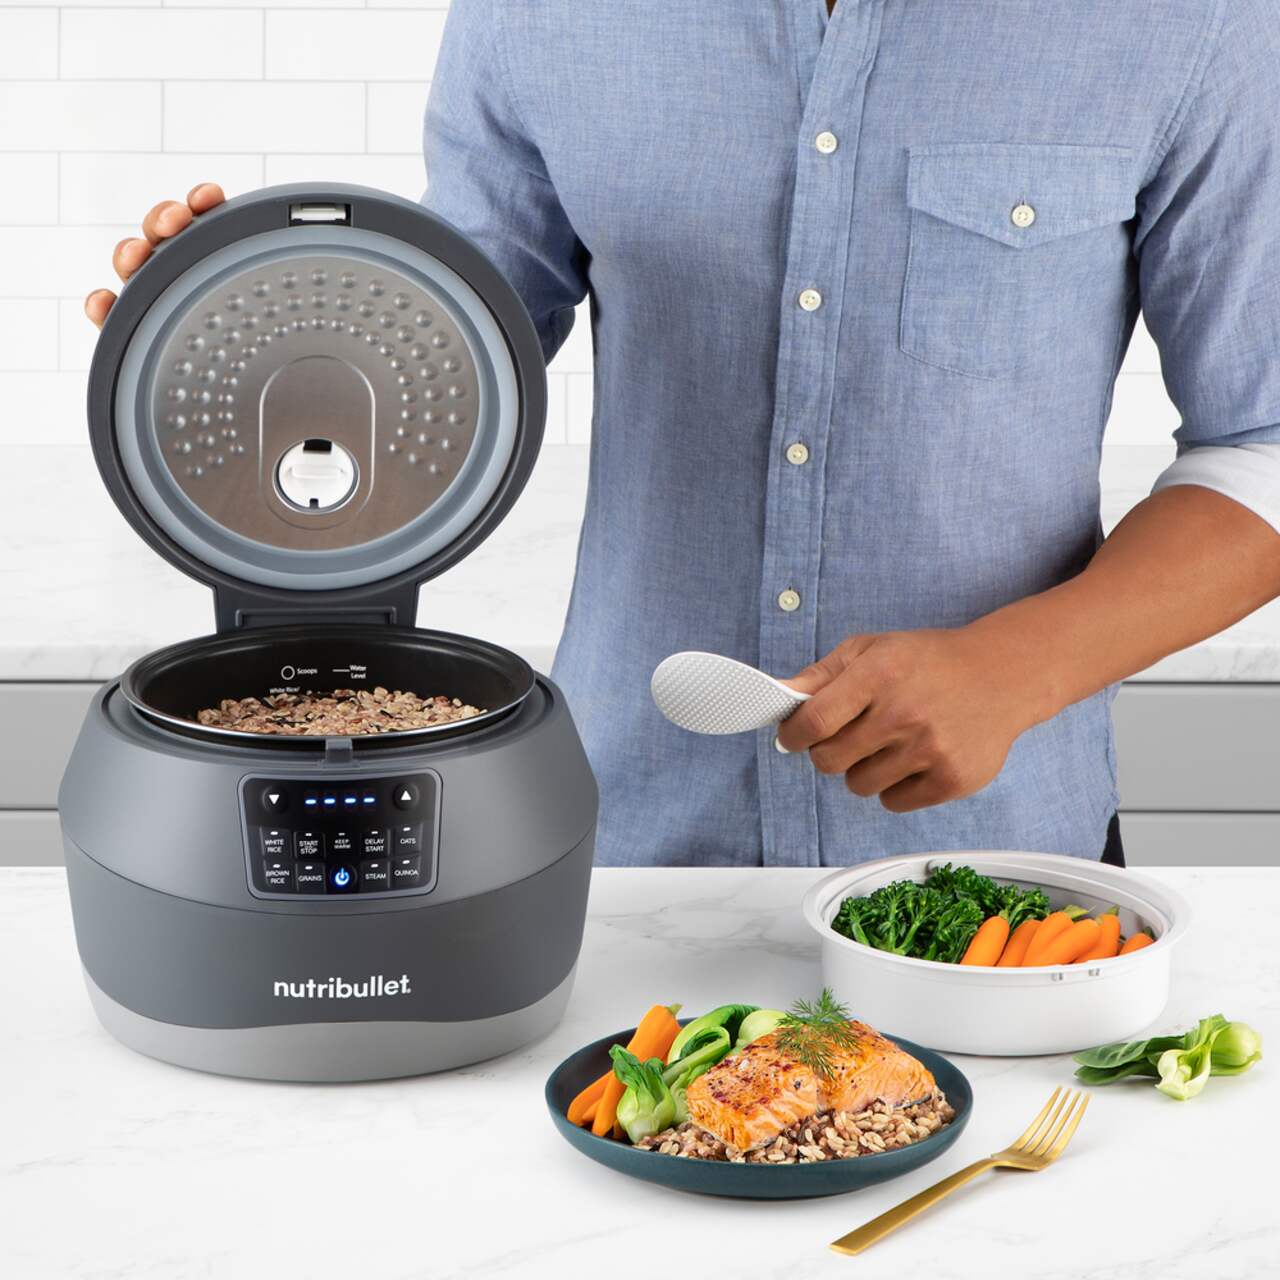 https://media-www.canadiantire.ca/product/living/kitchen/kitchen-appliances/0430109/nutribullet-everygrain-cooker-b4038646-e6af-4540-9026-c88550461548.png?imdensity=1&imwidth=1244&impolicy=mZoom